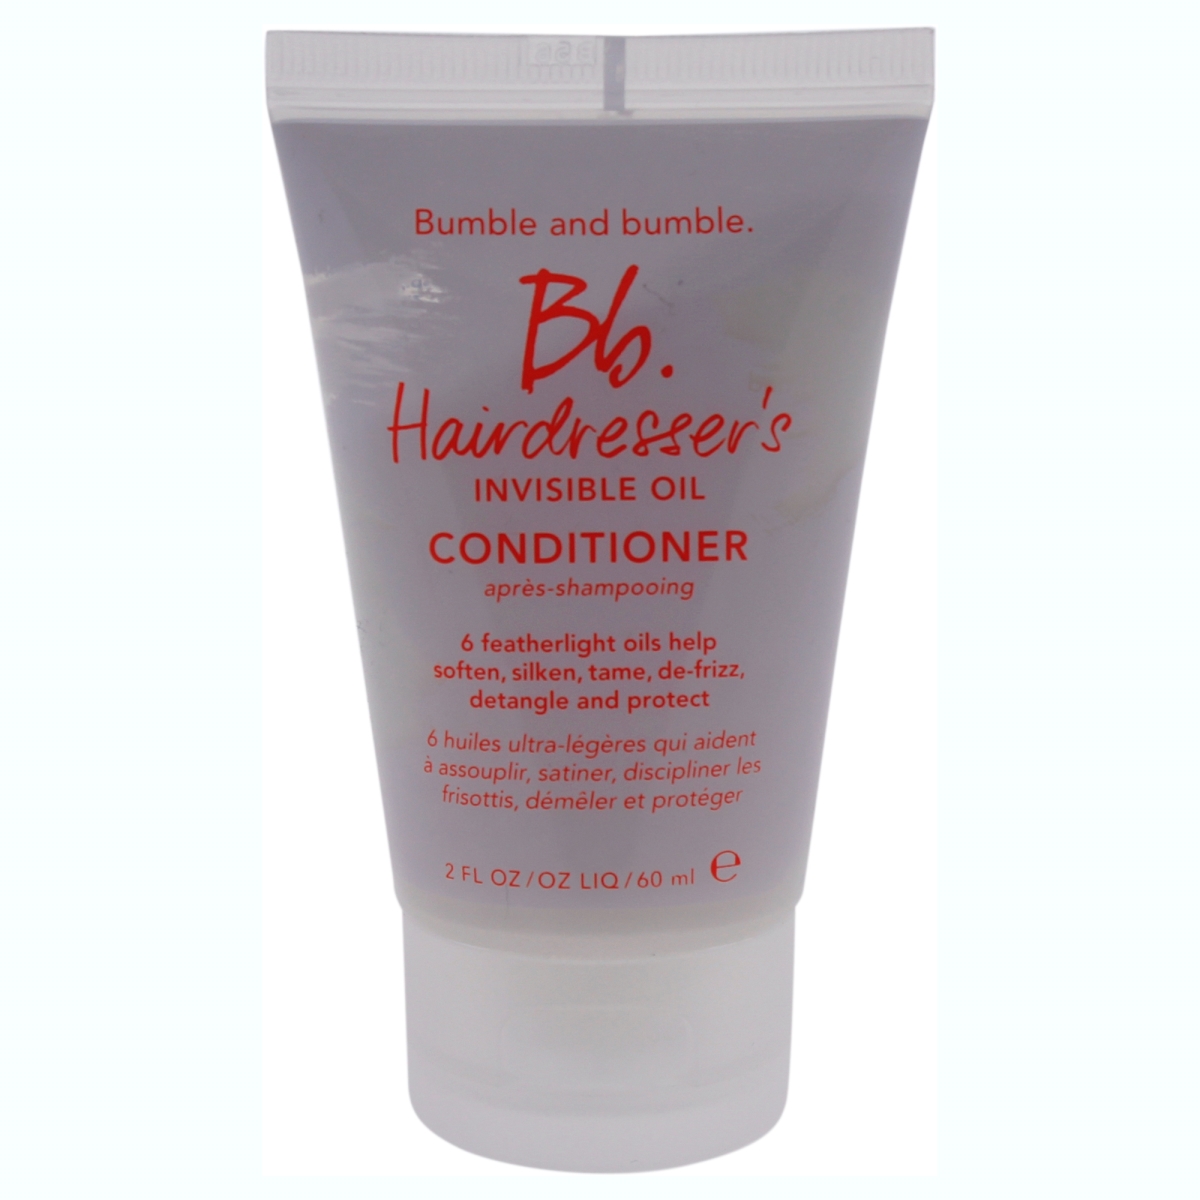 Bumble & Bumble U-hc-11345 2 Oz Unisex Hairdressers Invisible Oil Conditioner